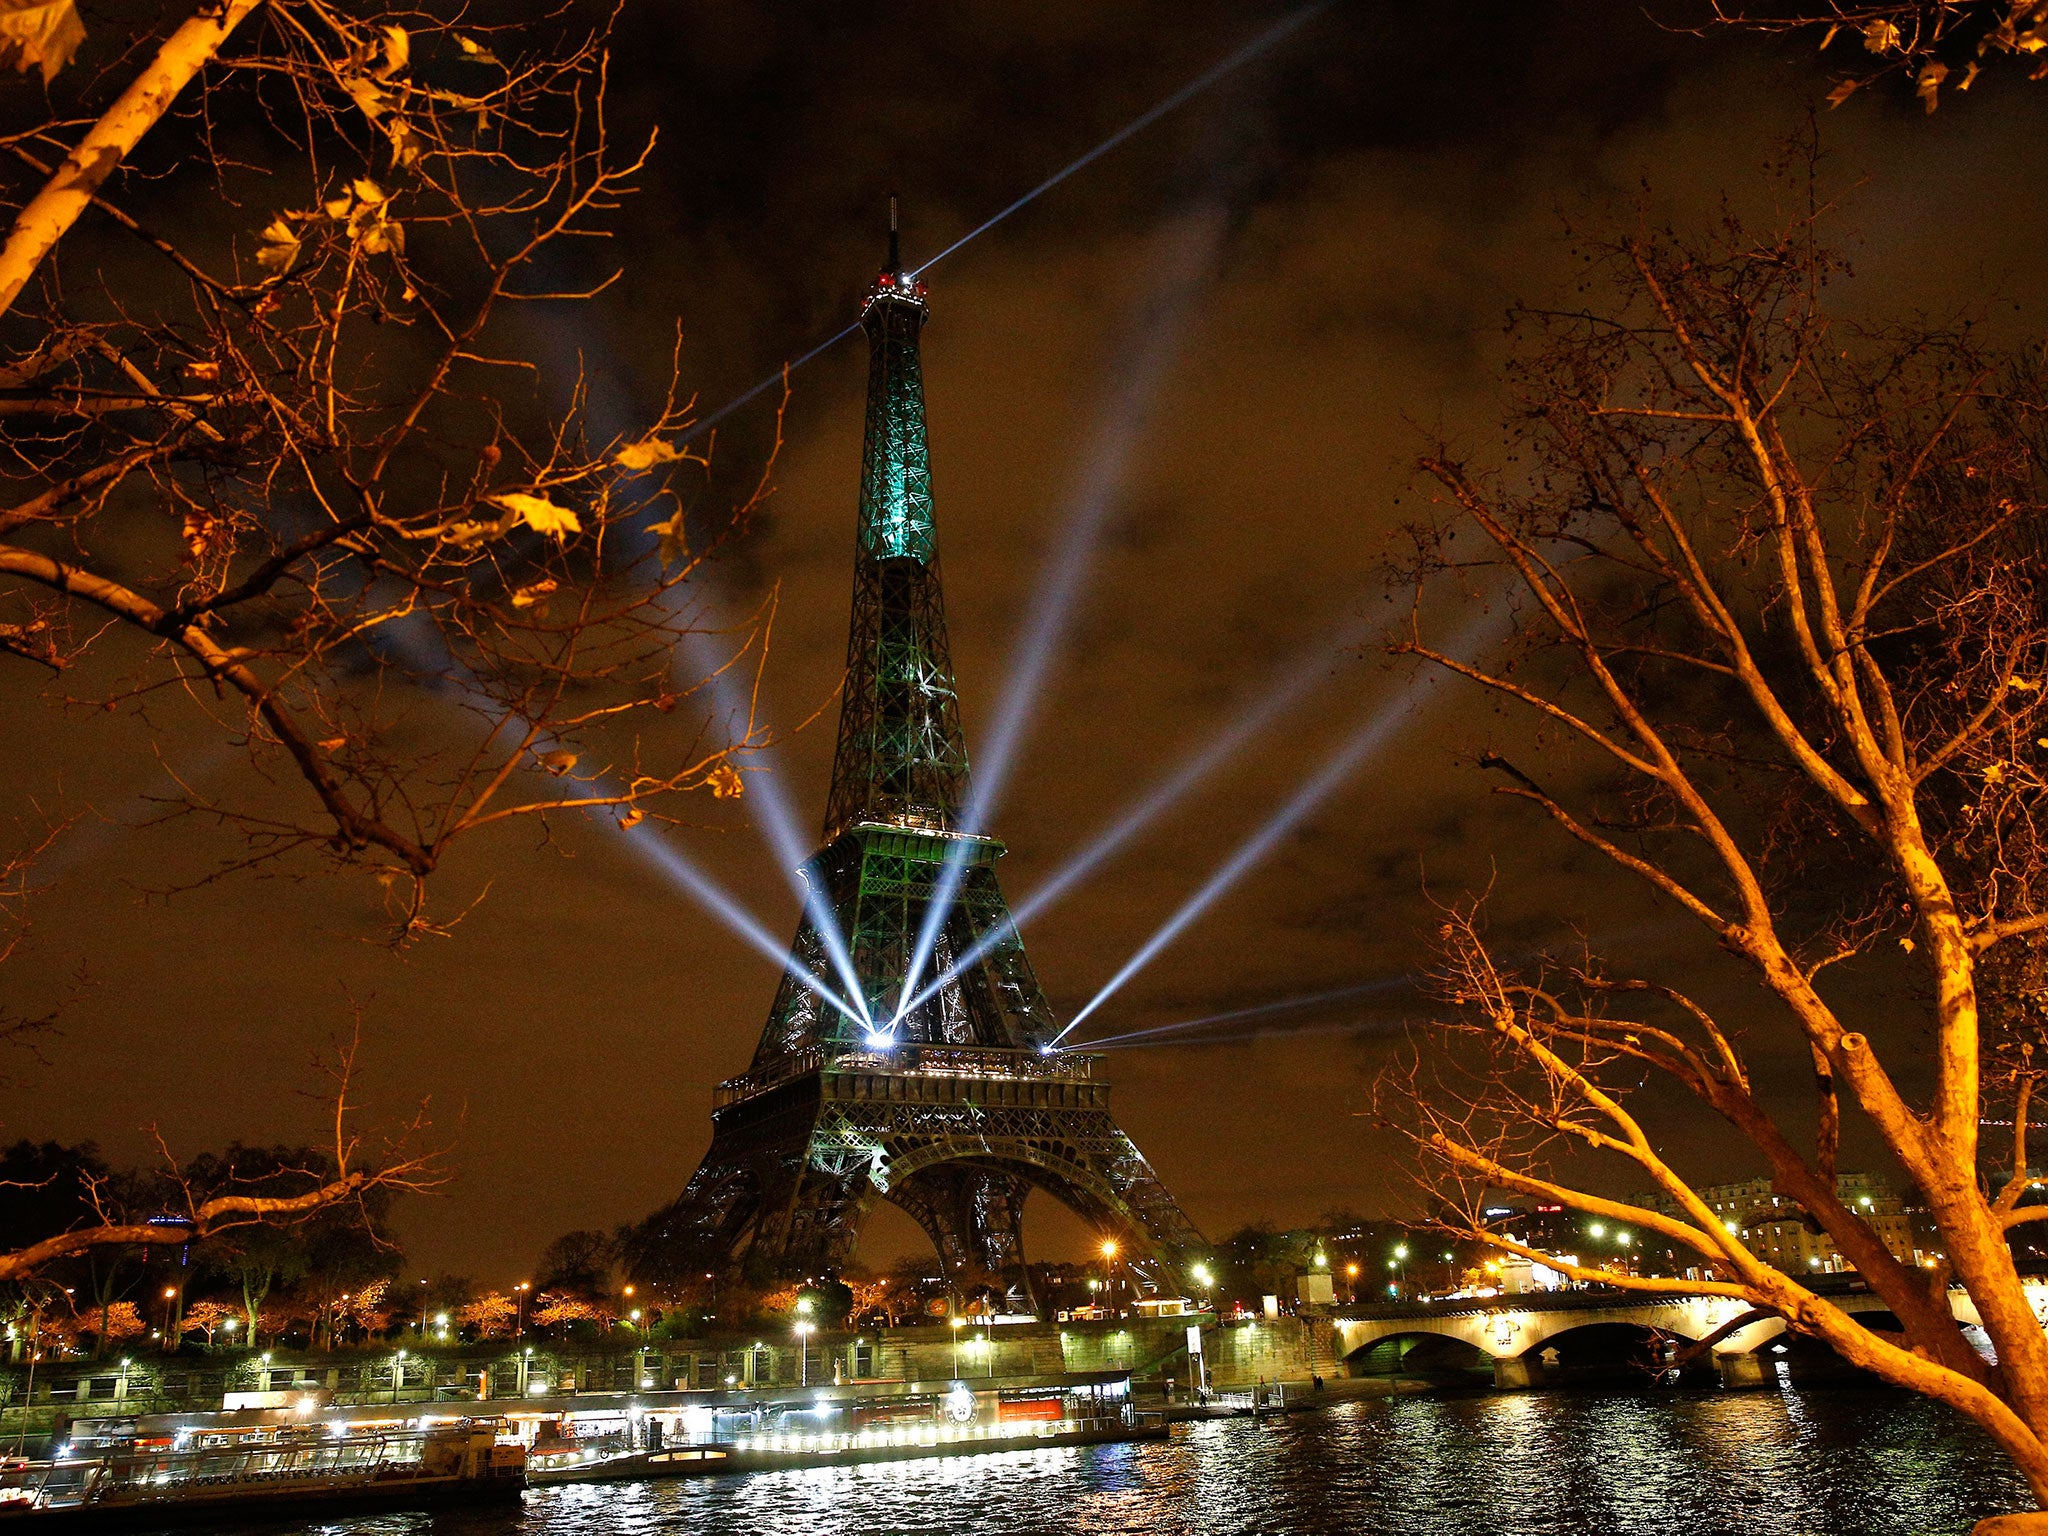 &#13;
The Eiffel Tower lights up with colors and messages of hope&#13;